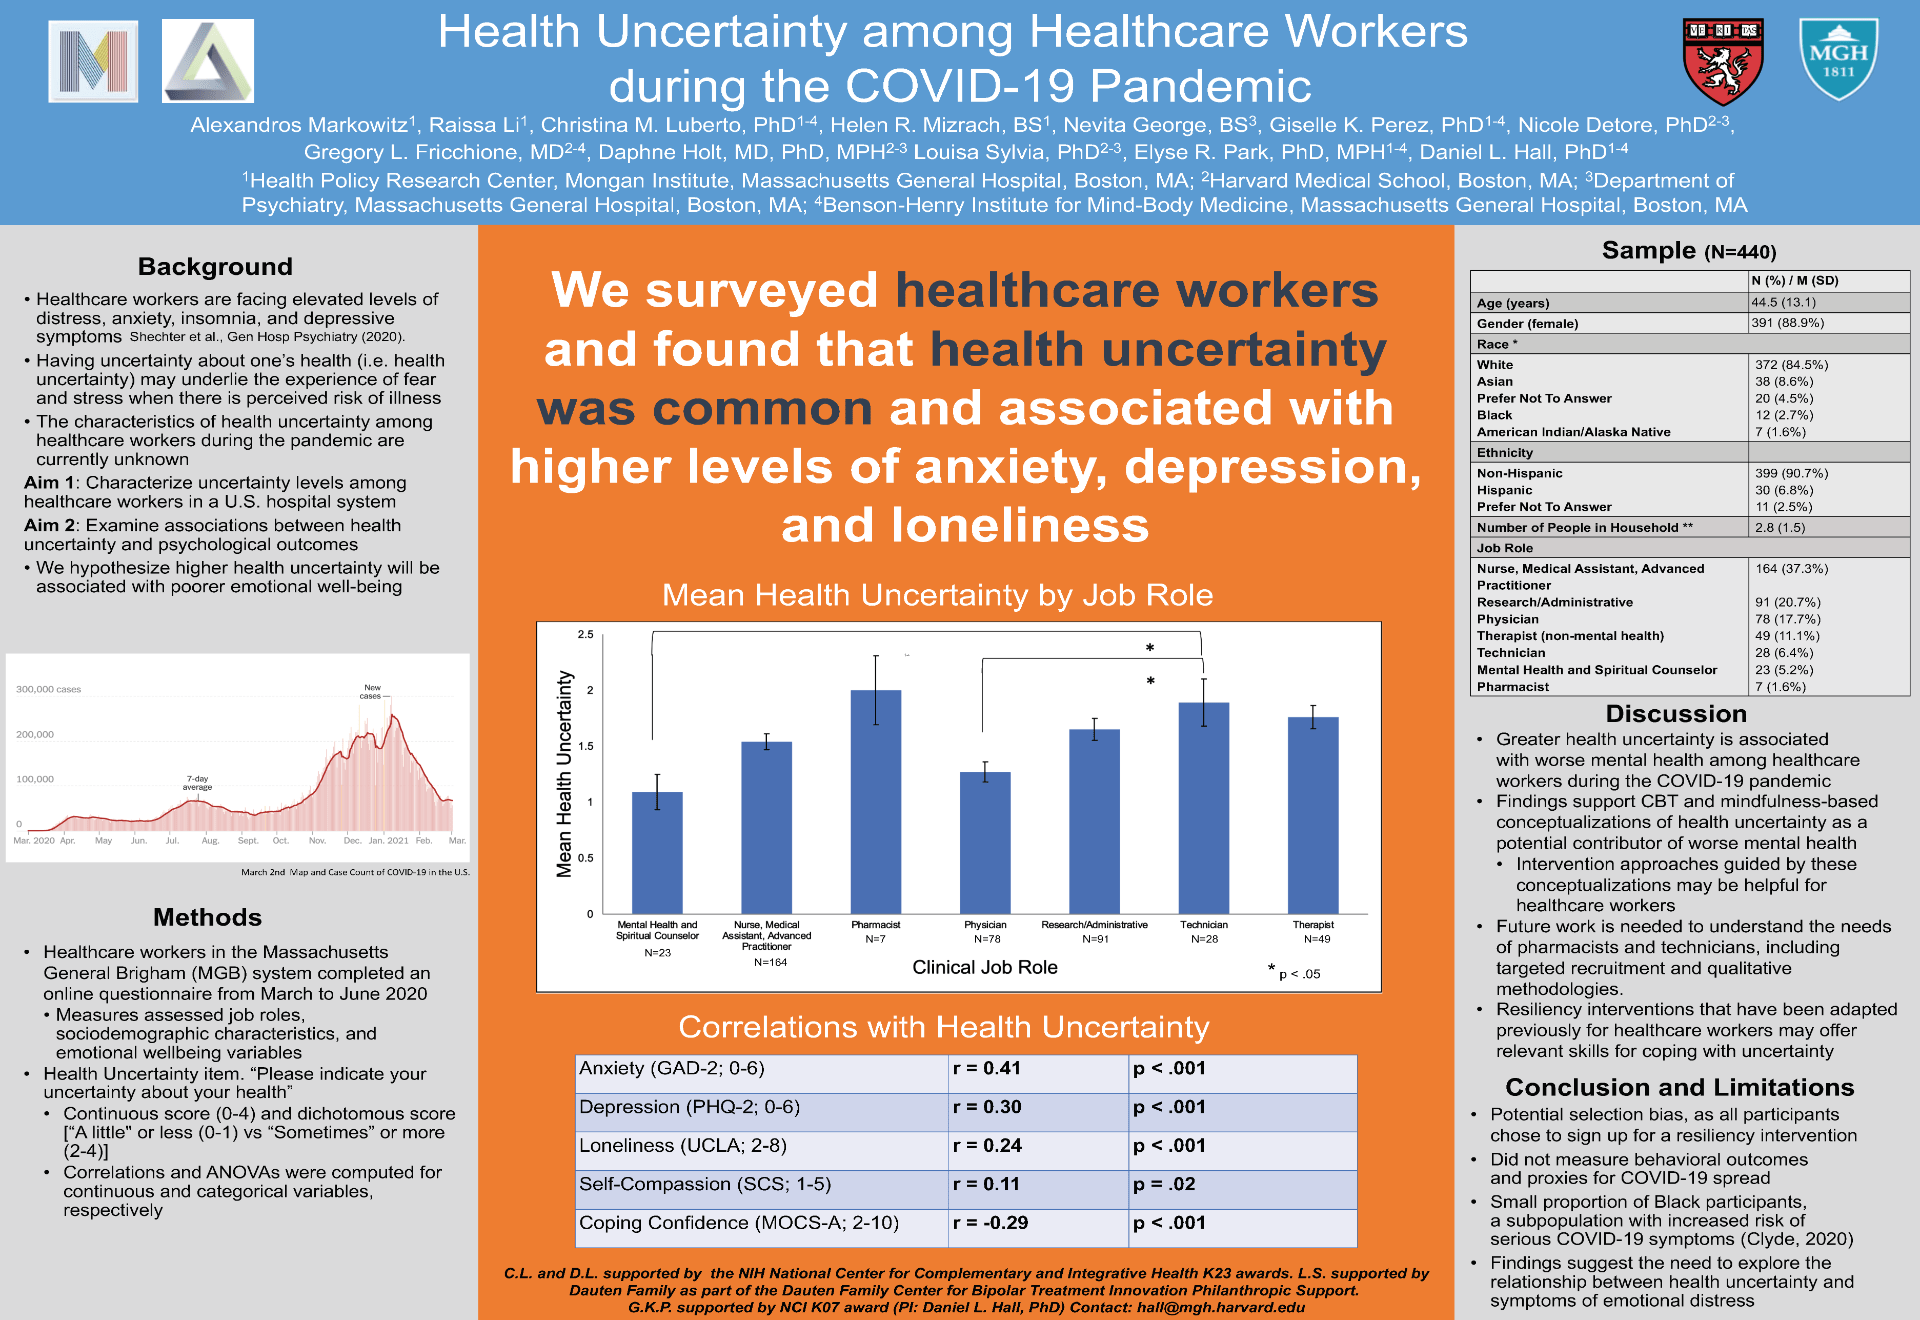 Health Uncertainty among Healthcare Workers during the COVID-19 Pandemic